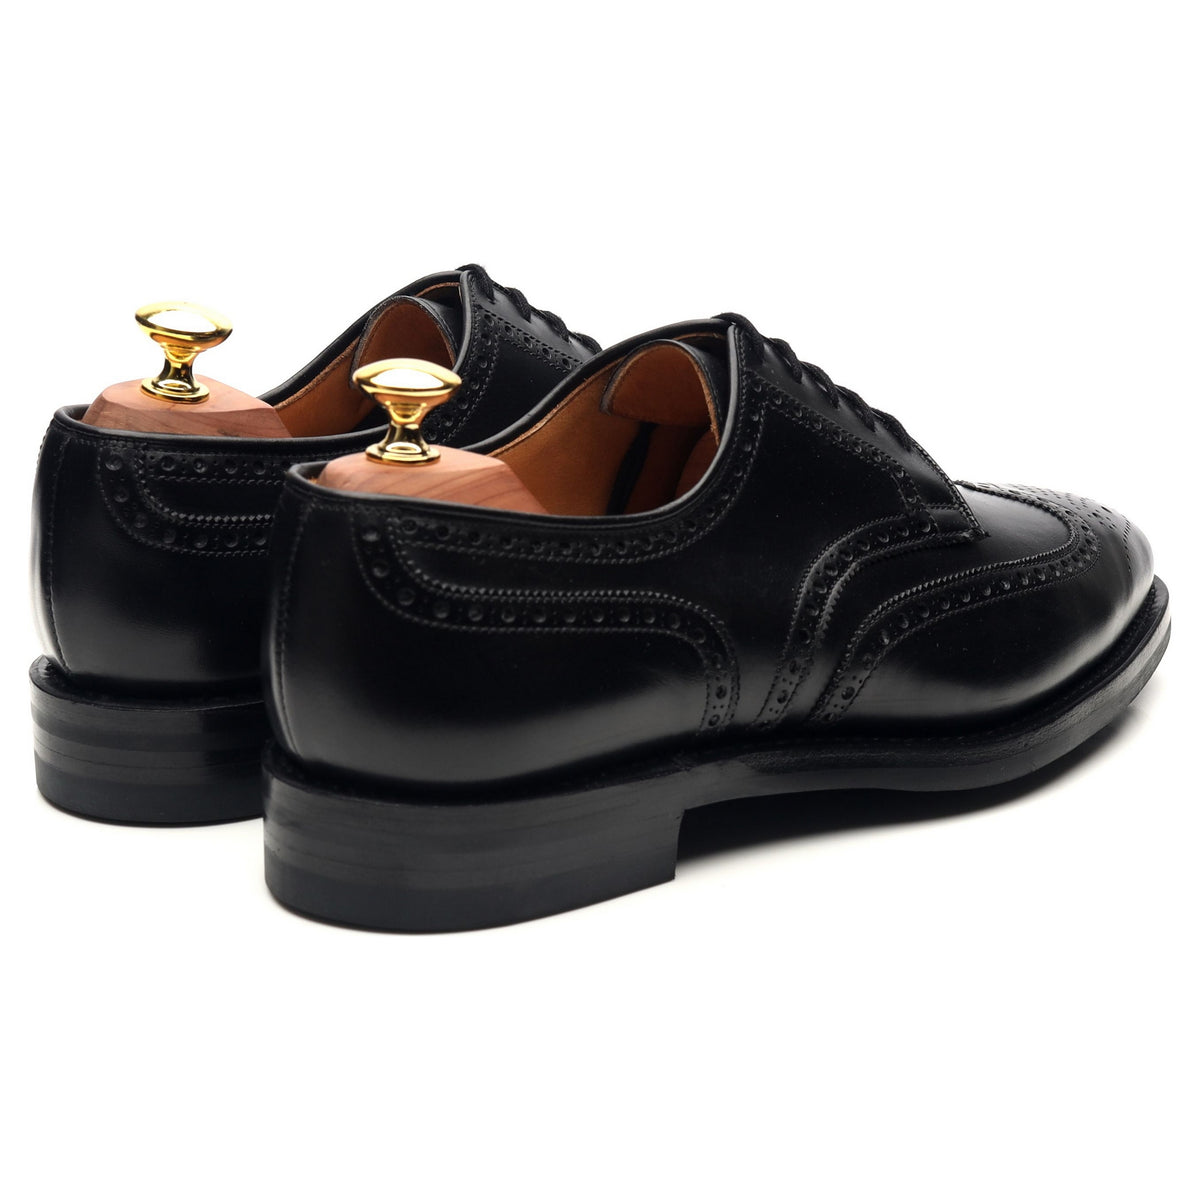 &#39;Swansea&#39; Black Leather Derby Brogues UK 8 E